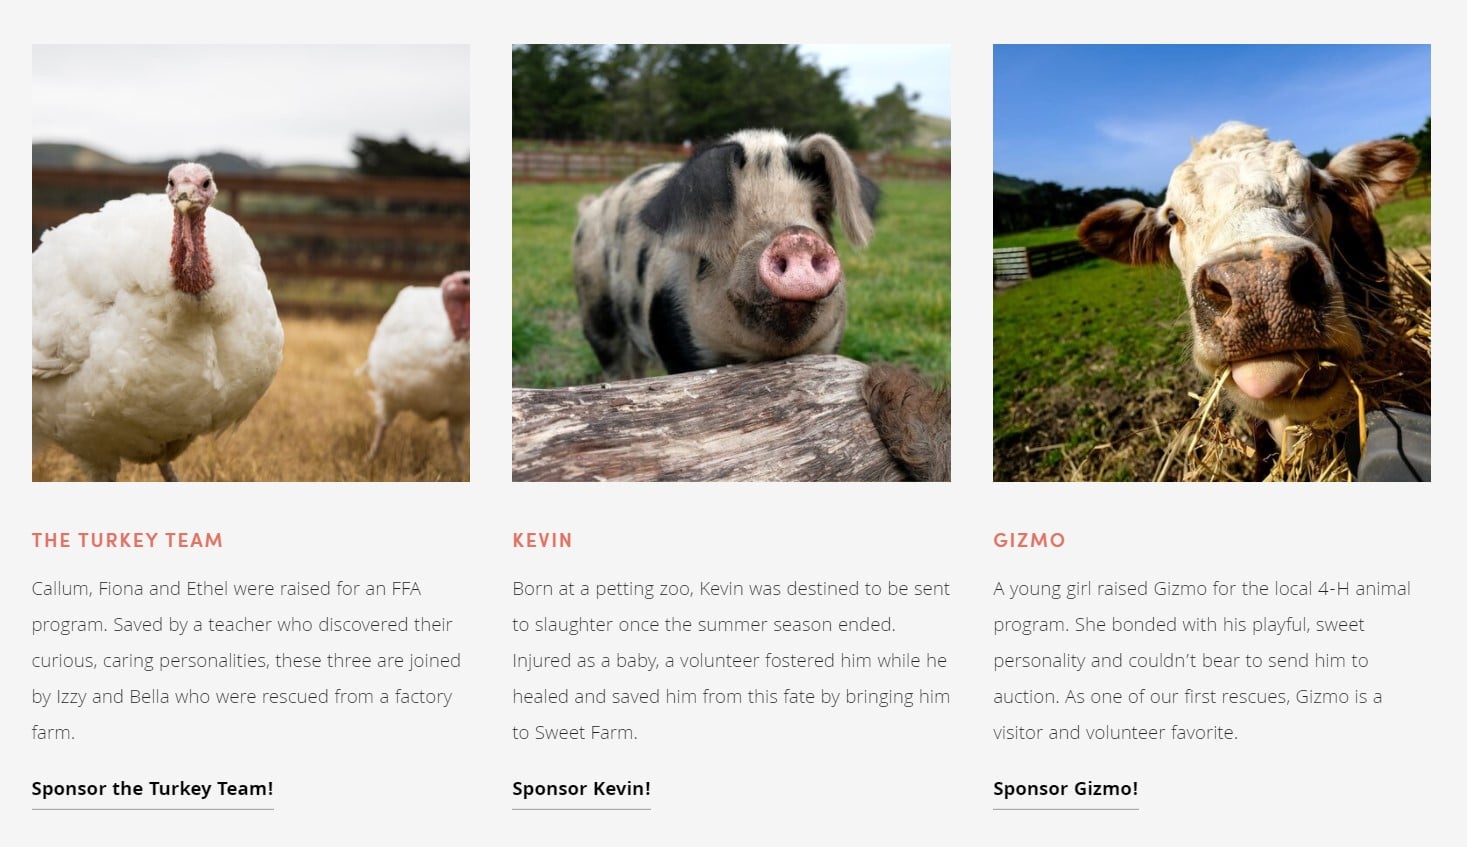 Capture from website showing three images of rescued farm animals (turkey, pig and cow)